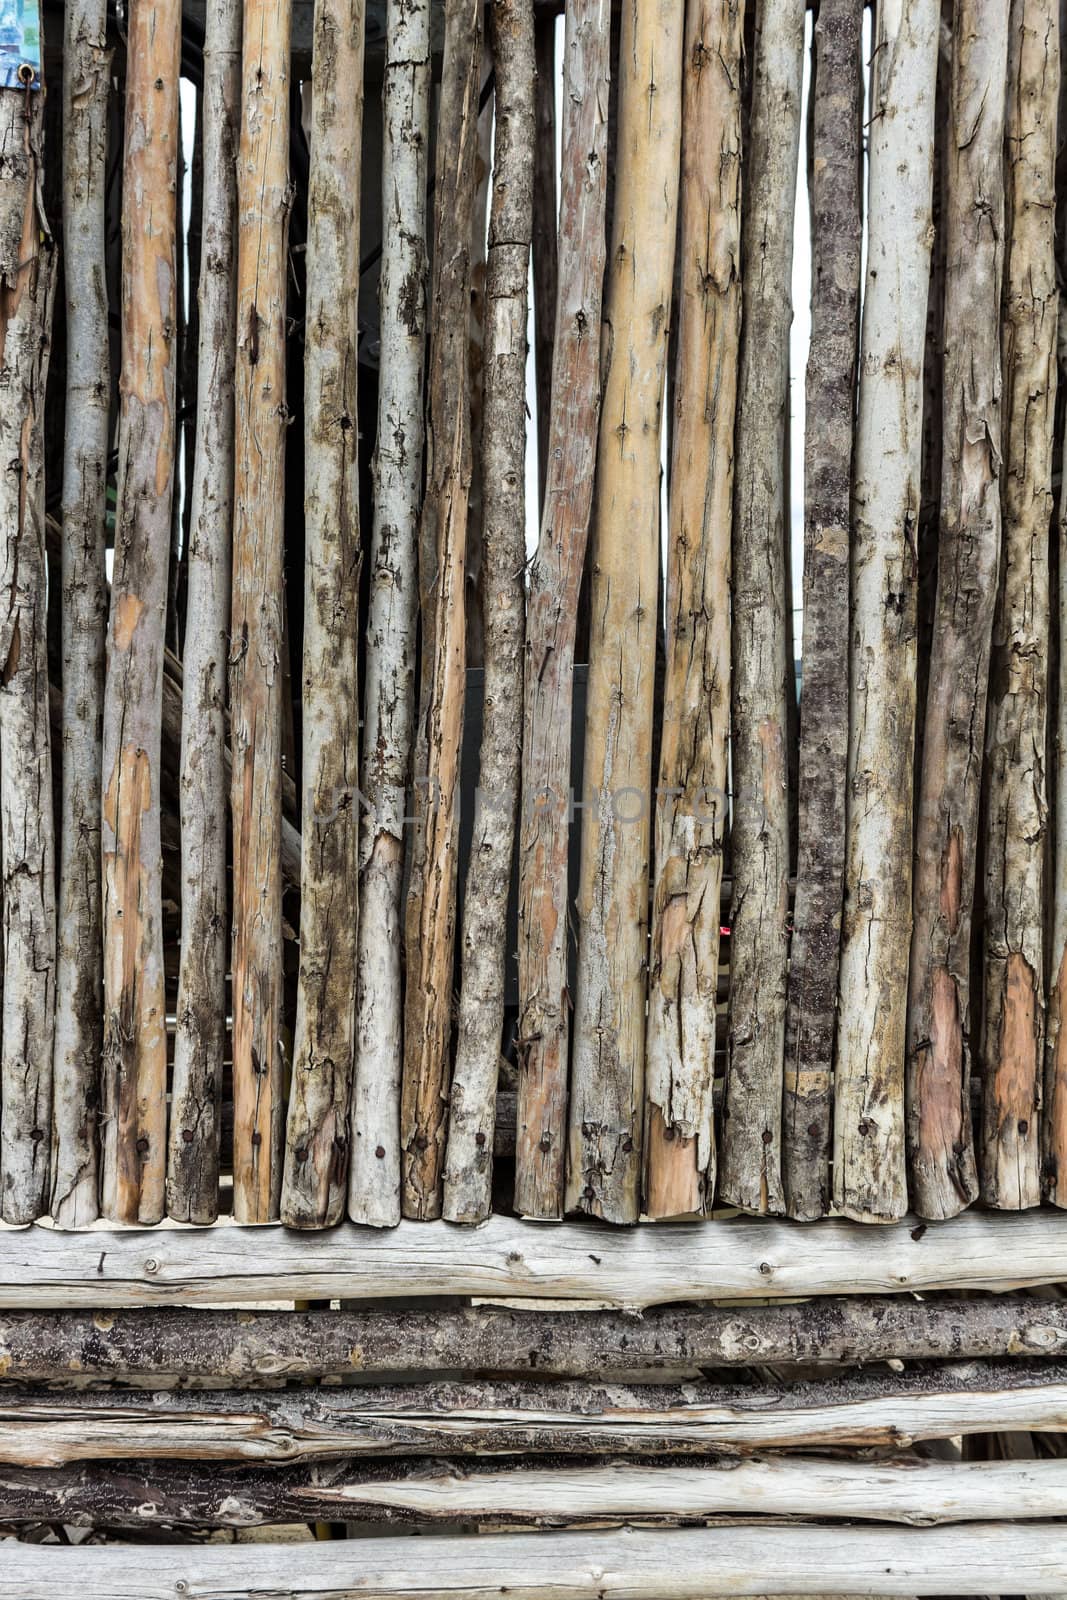 Traditional wooden rural wall from old logs